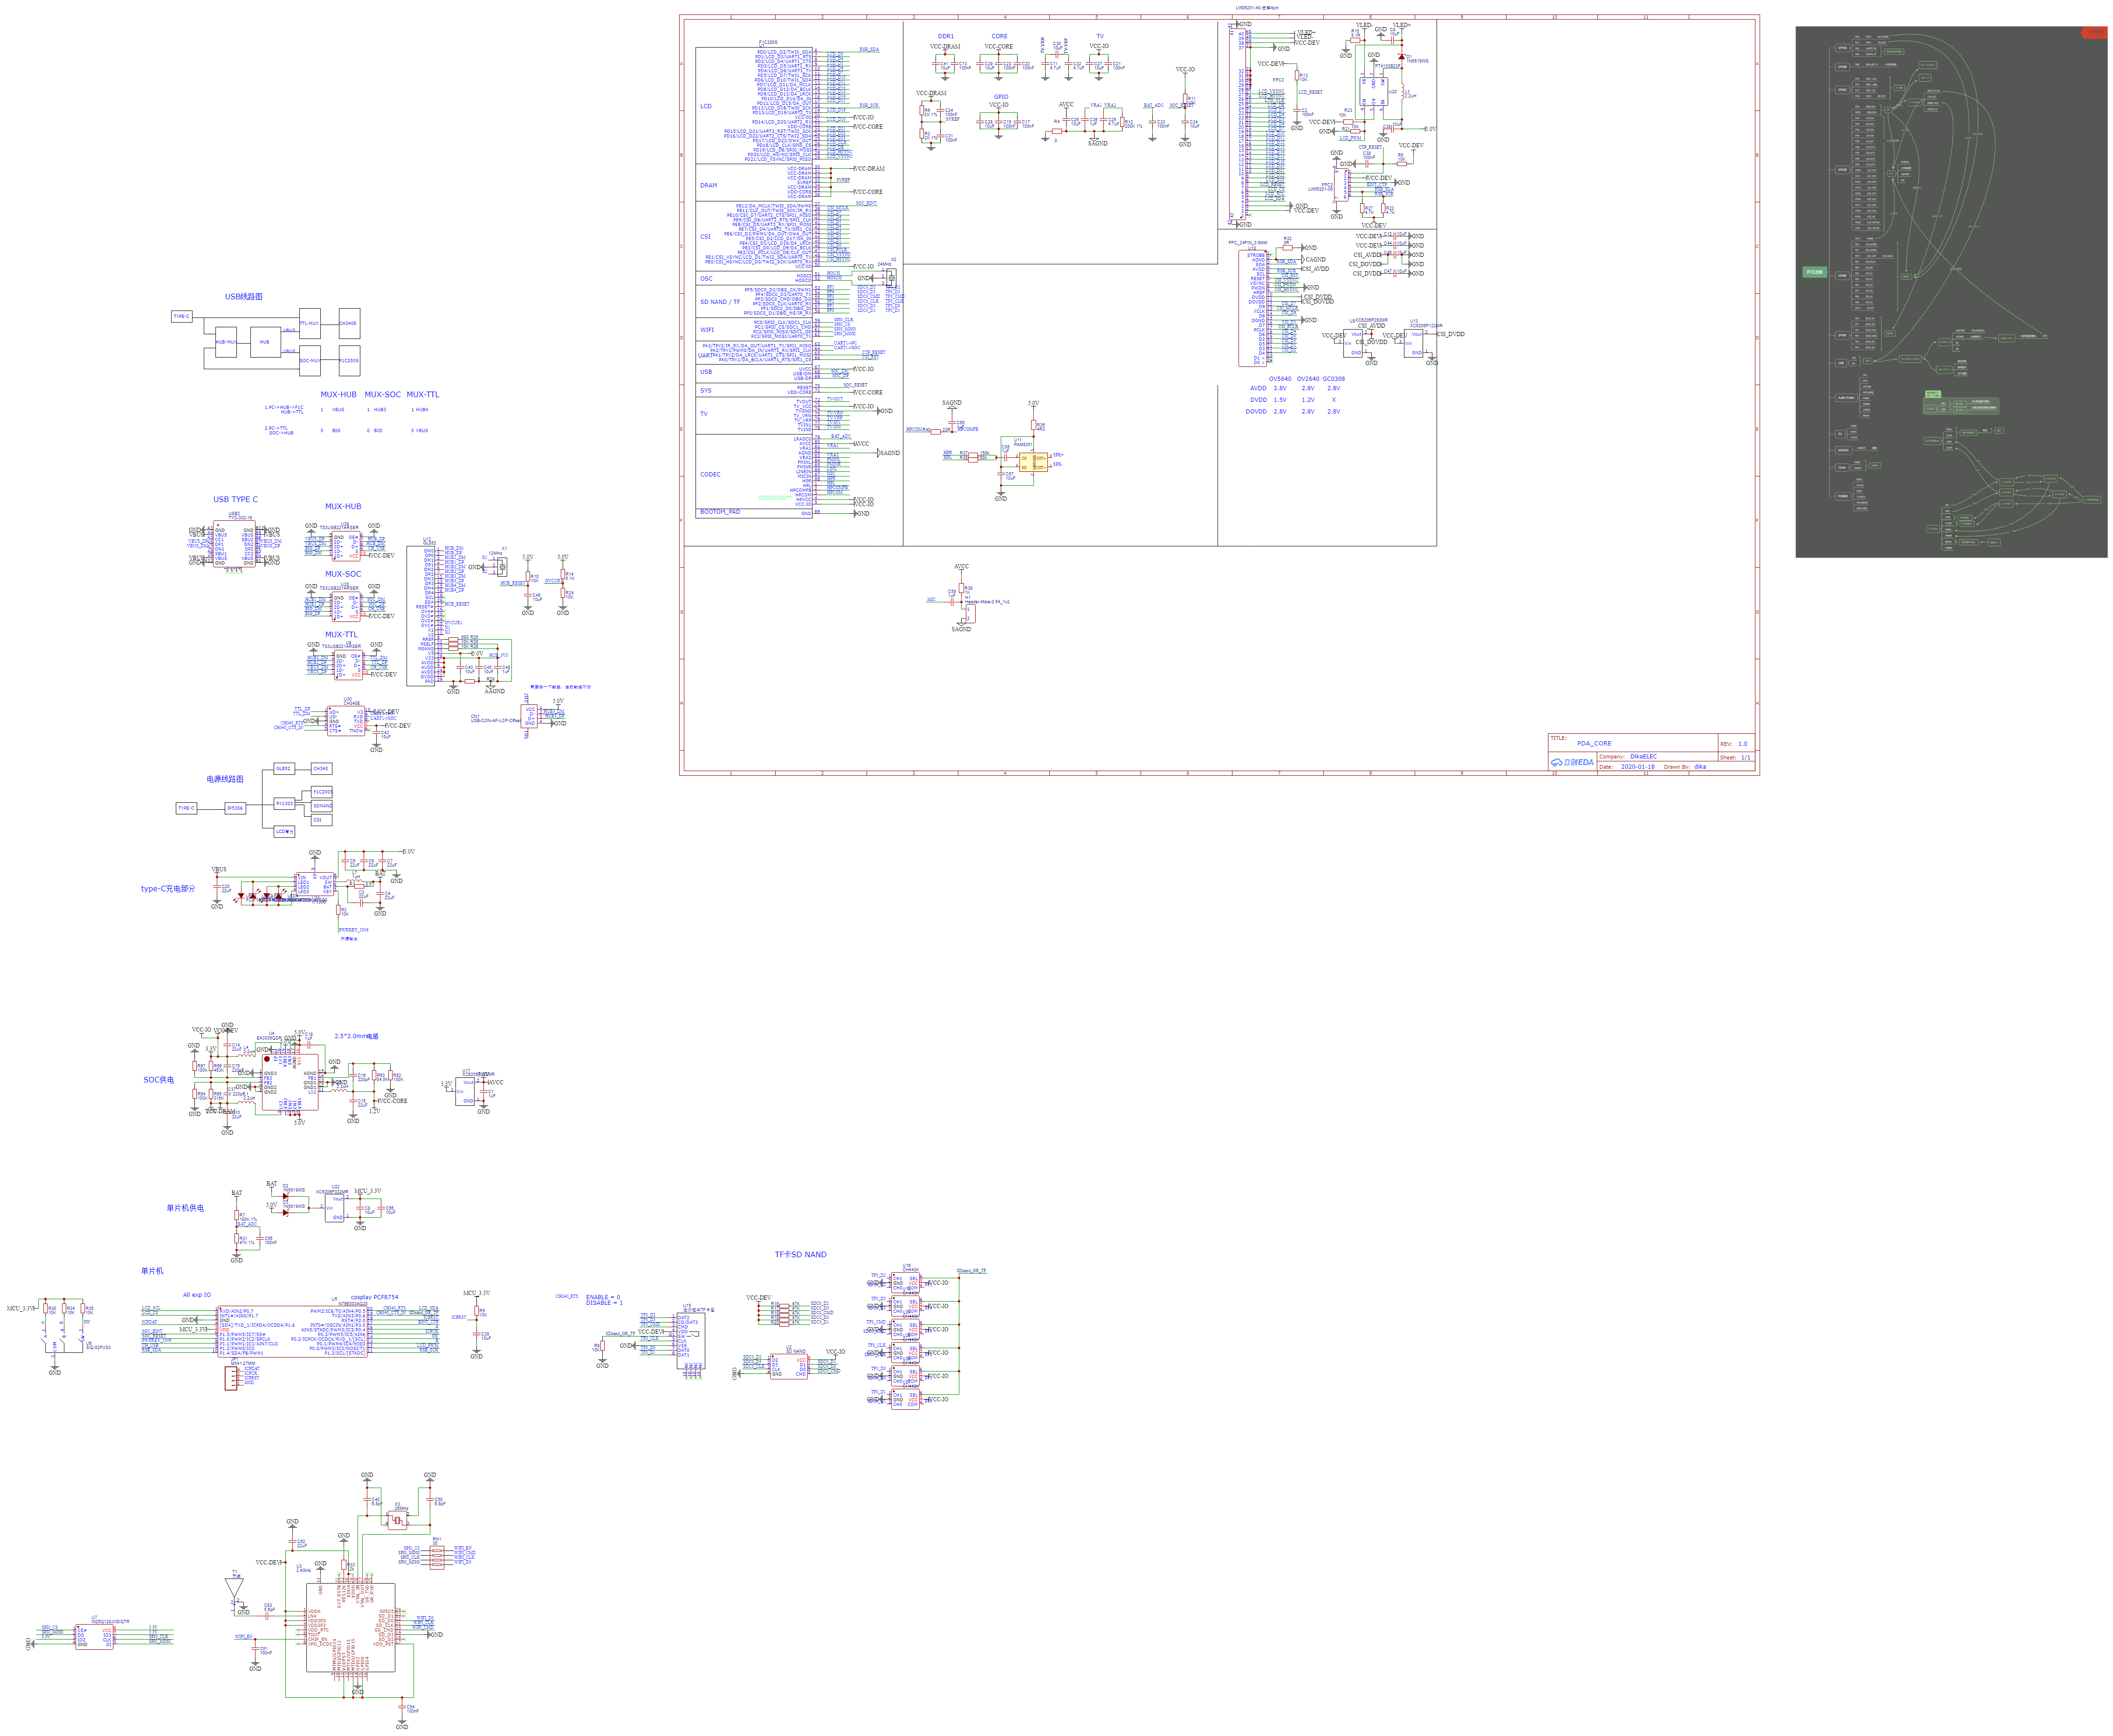 Schematic_200S_PDA_Core_V1_0_2020-05-29_10-20-07.png